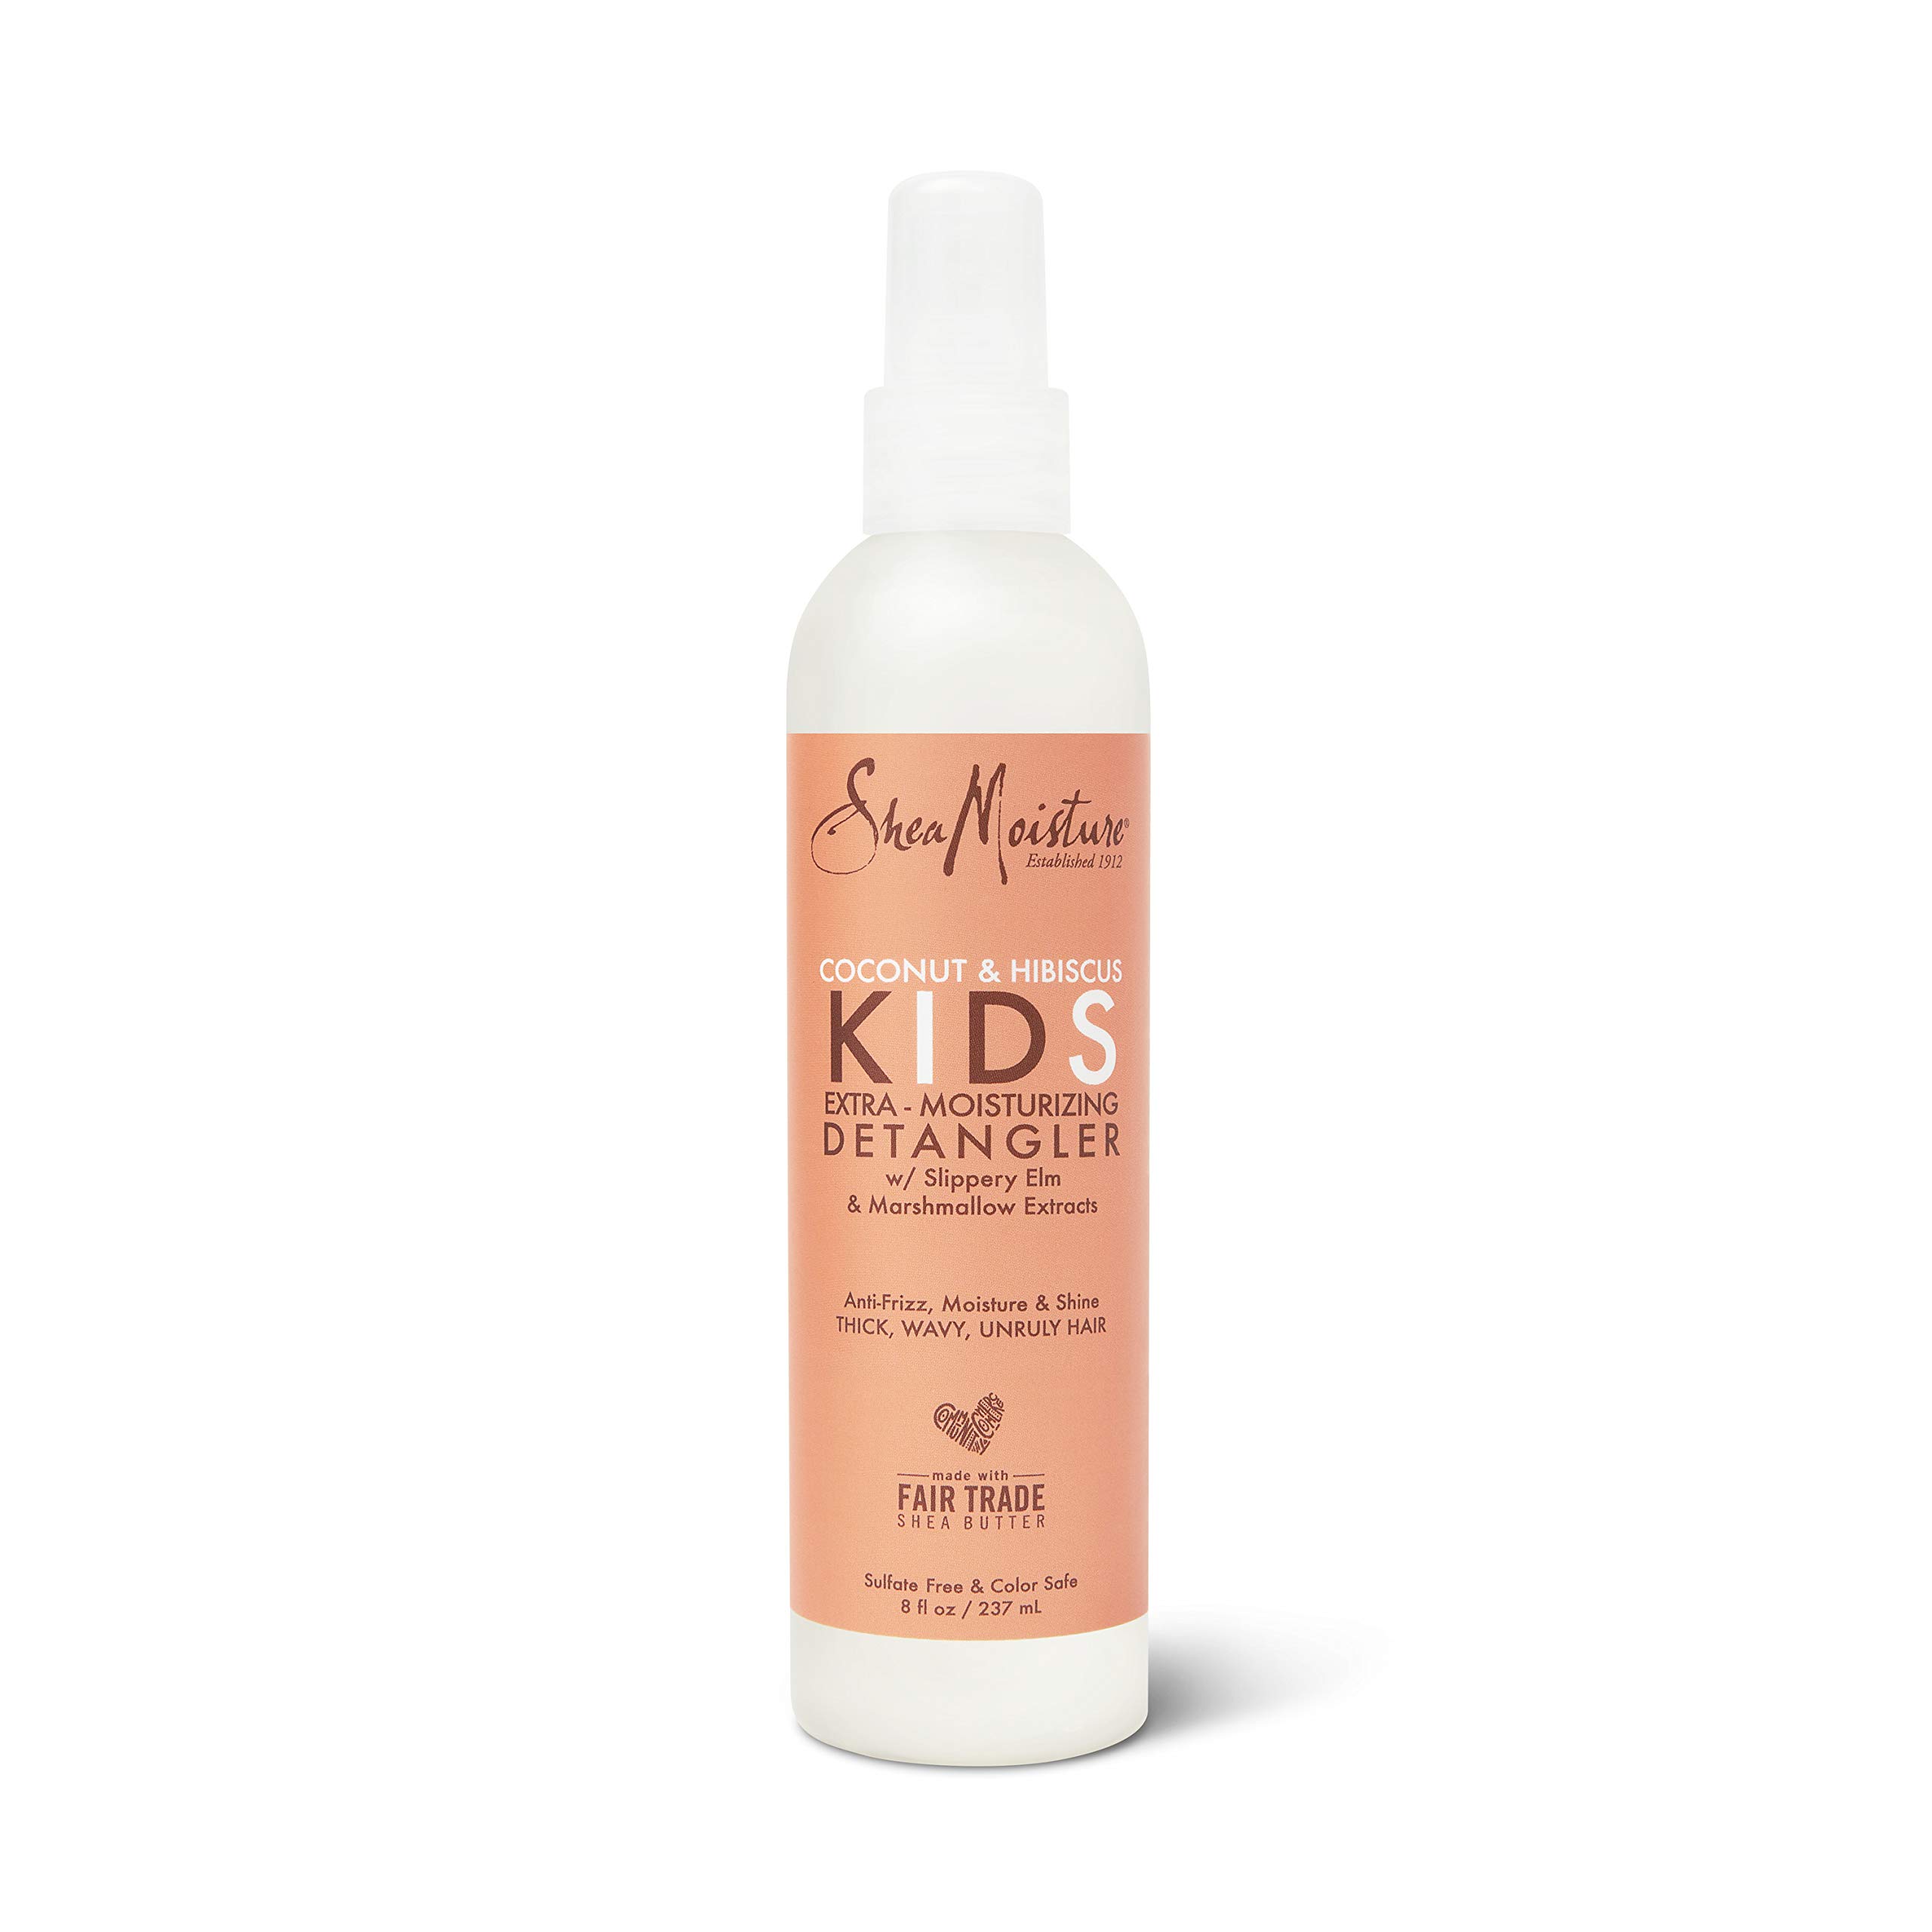 SheaMoisture Kids Moisturizing Detangler, 2-In-1 Shampoo & Conditioner, and Curling Coconut & Hibiscus 3 Count Curl & Shine For Curly Hair